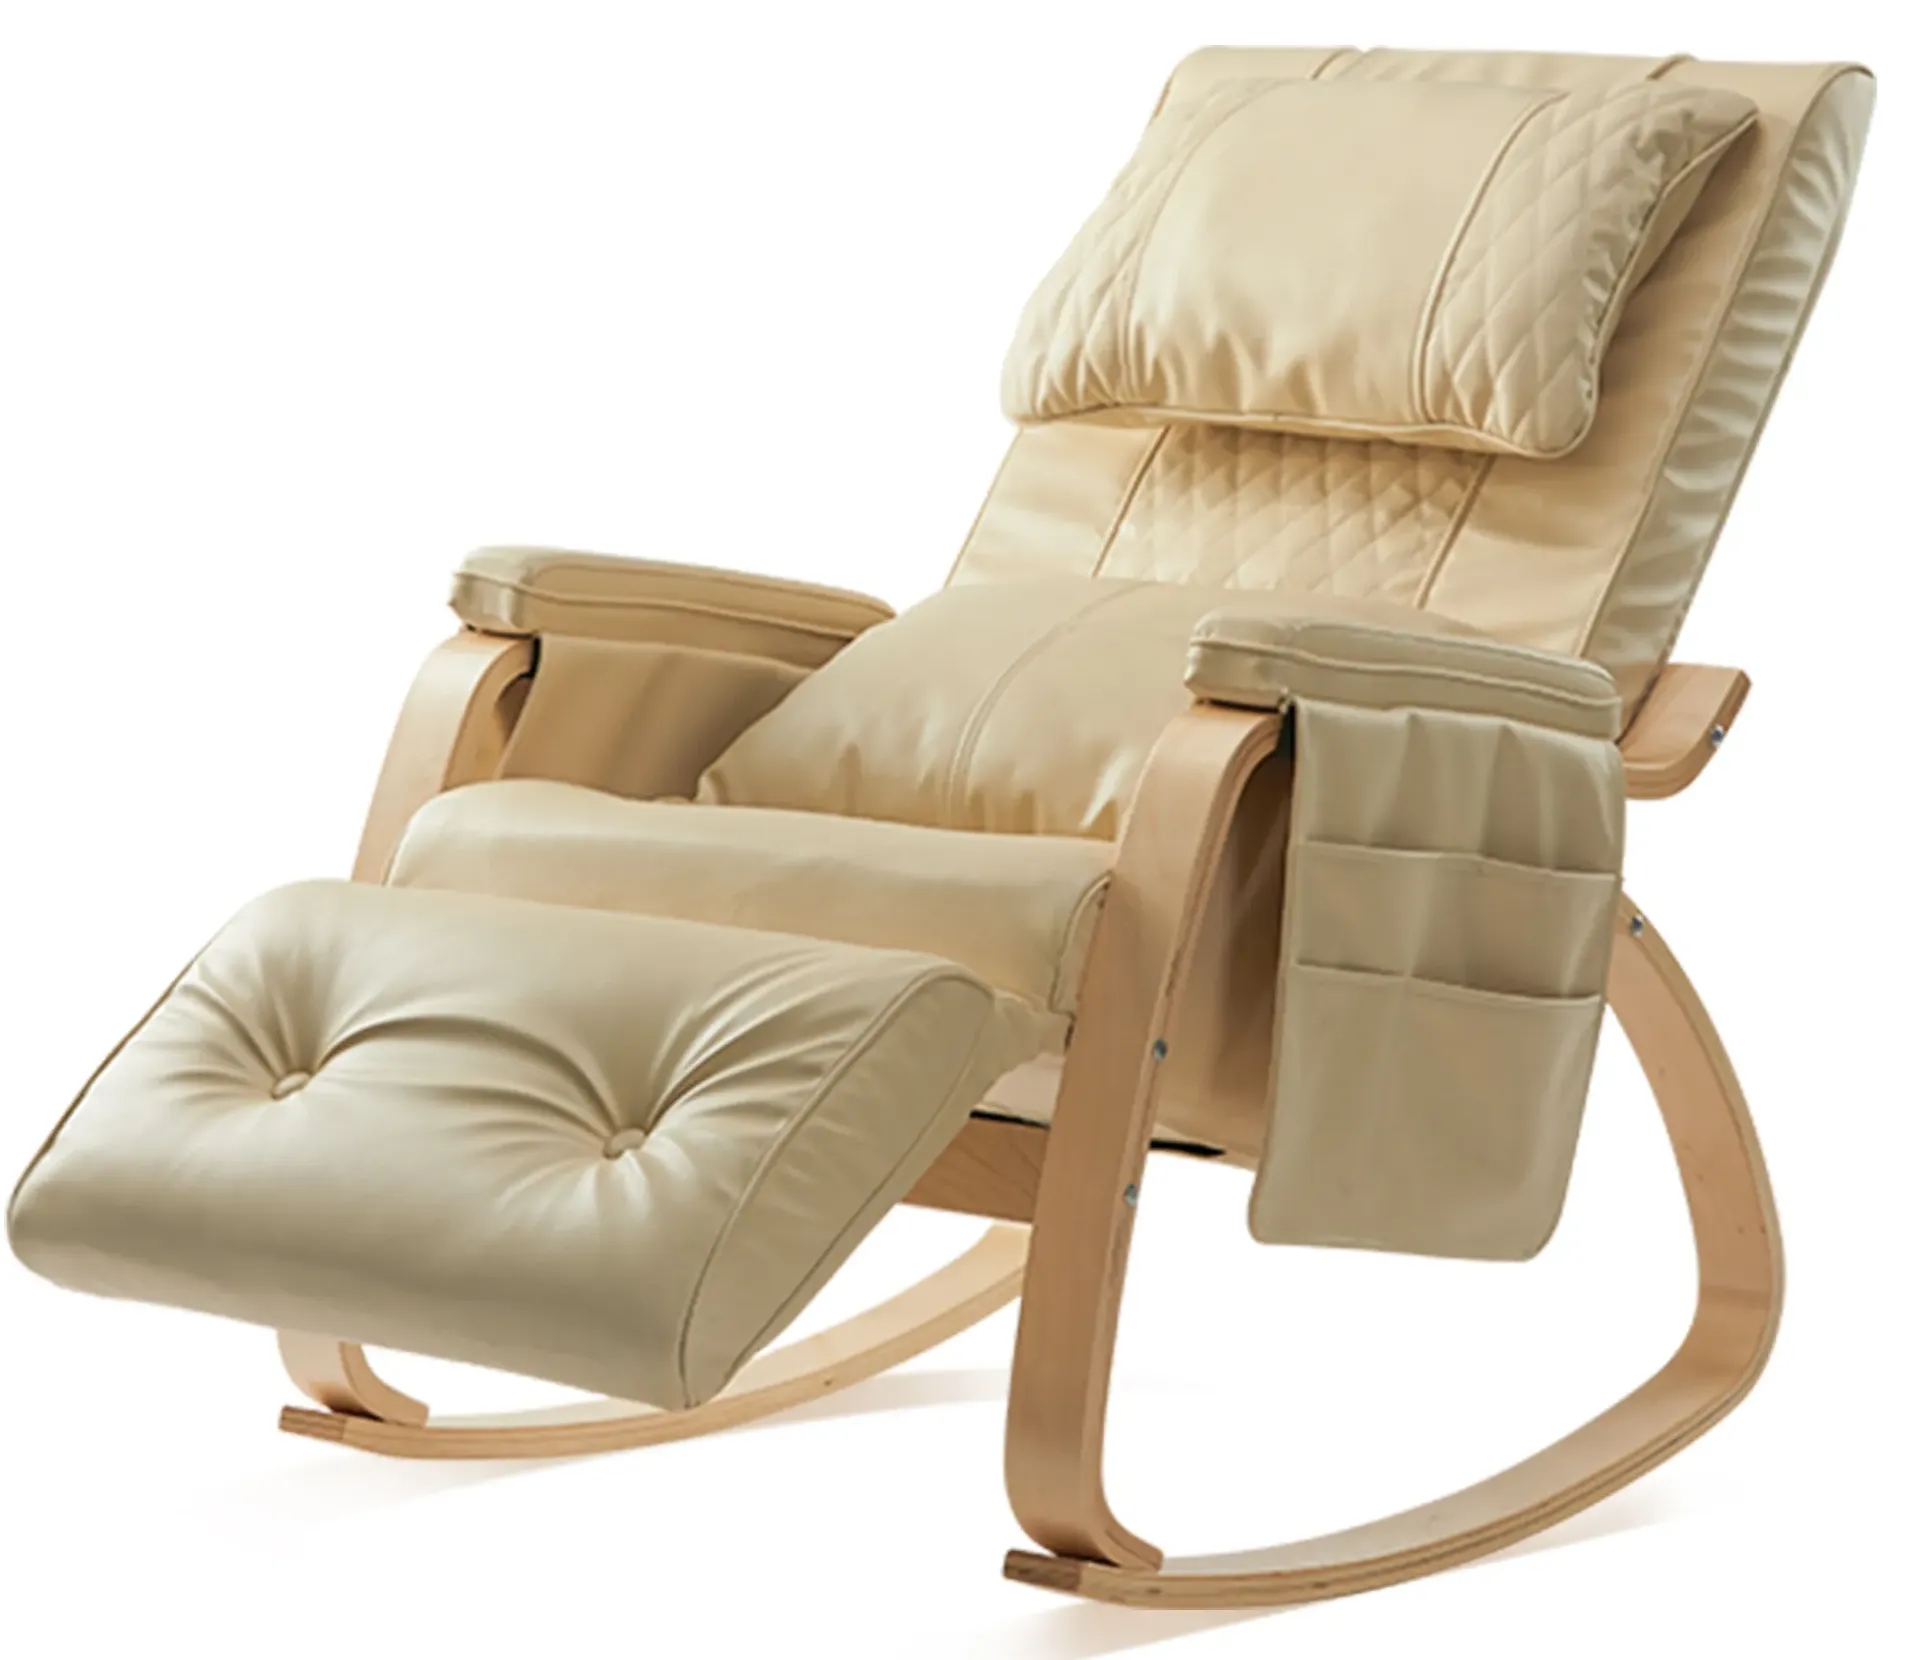 PU leather recliner chair 